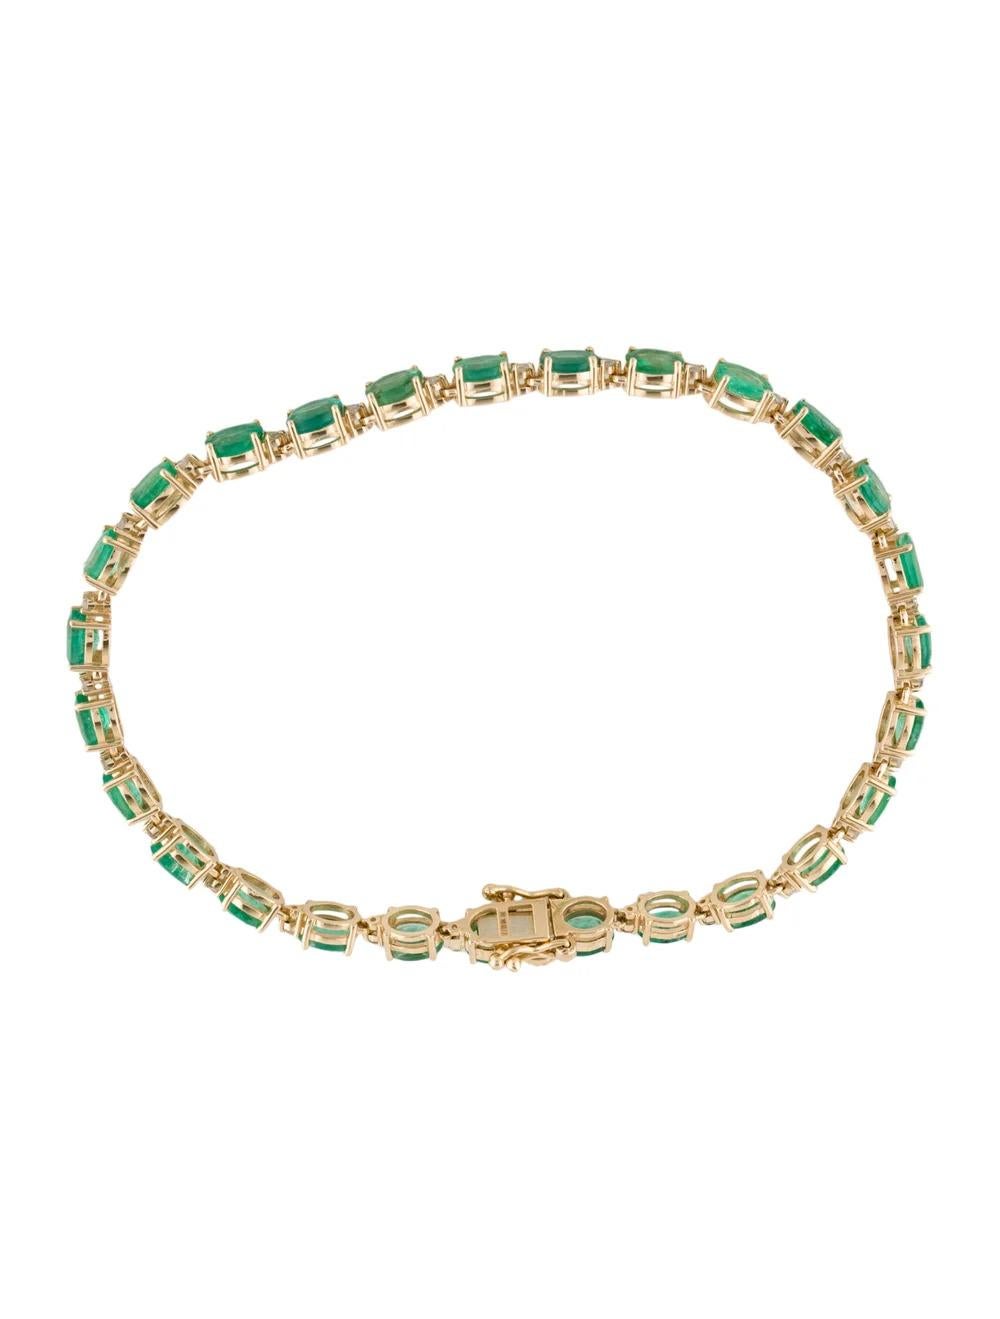 14K Emerald & Diamond Link Bracelet 7.73ctw - Yellow Gold, Vintage Jewelry In New Condition For Sale In Holtsville, NY